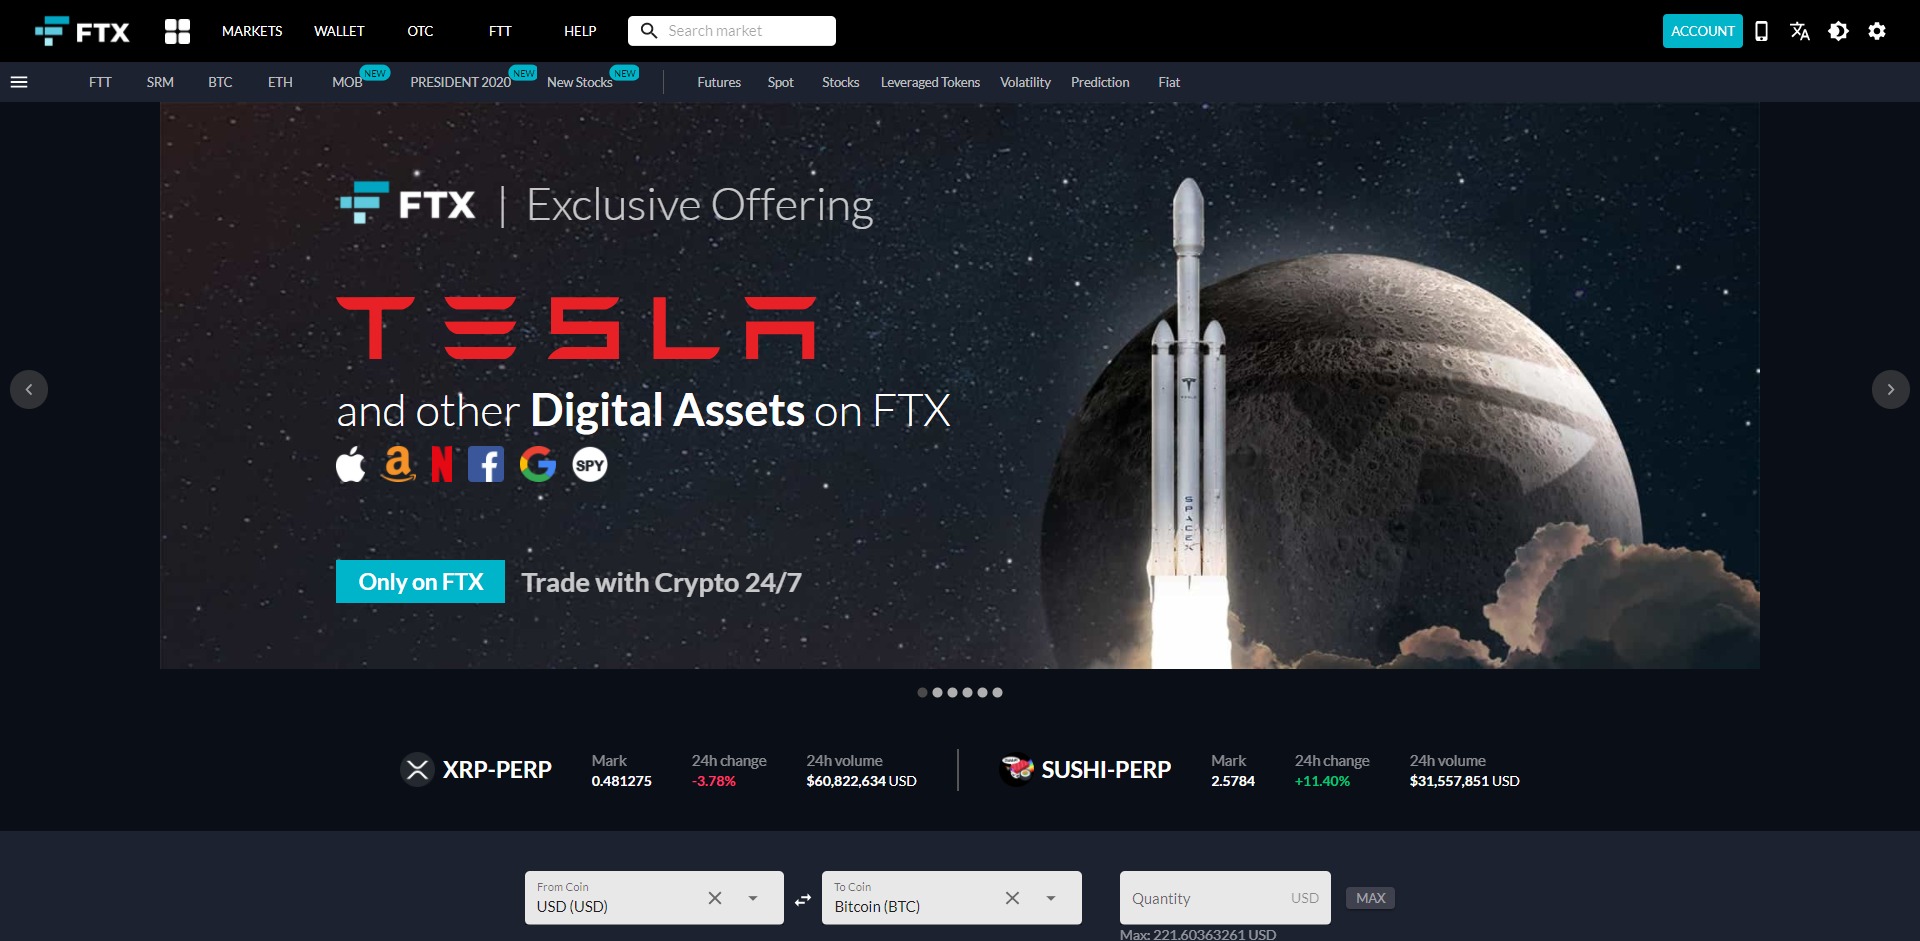 FTX Trading Home Page